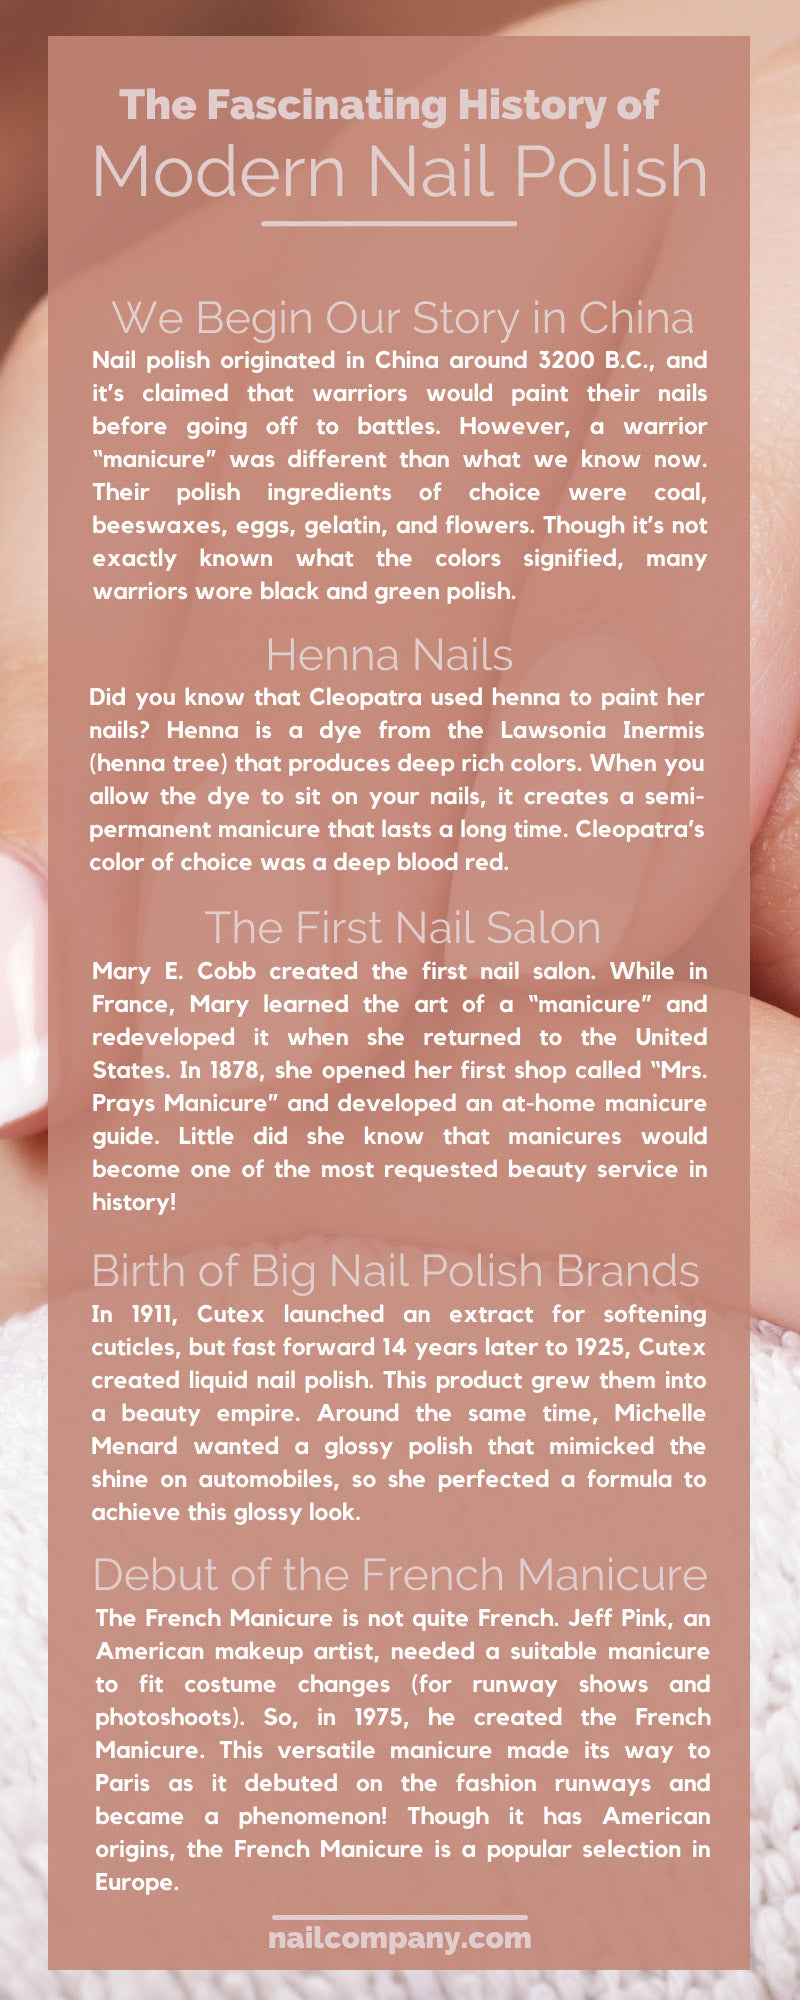 The cultural evolution of nail art through the years - Harpers bazaar